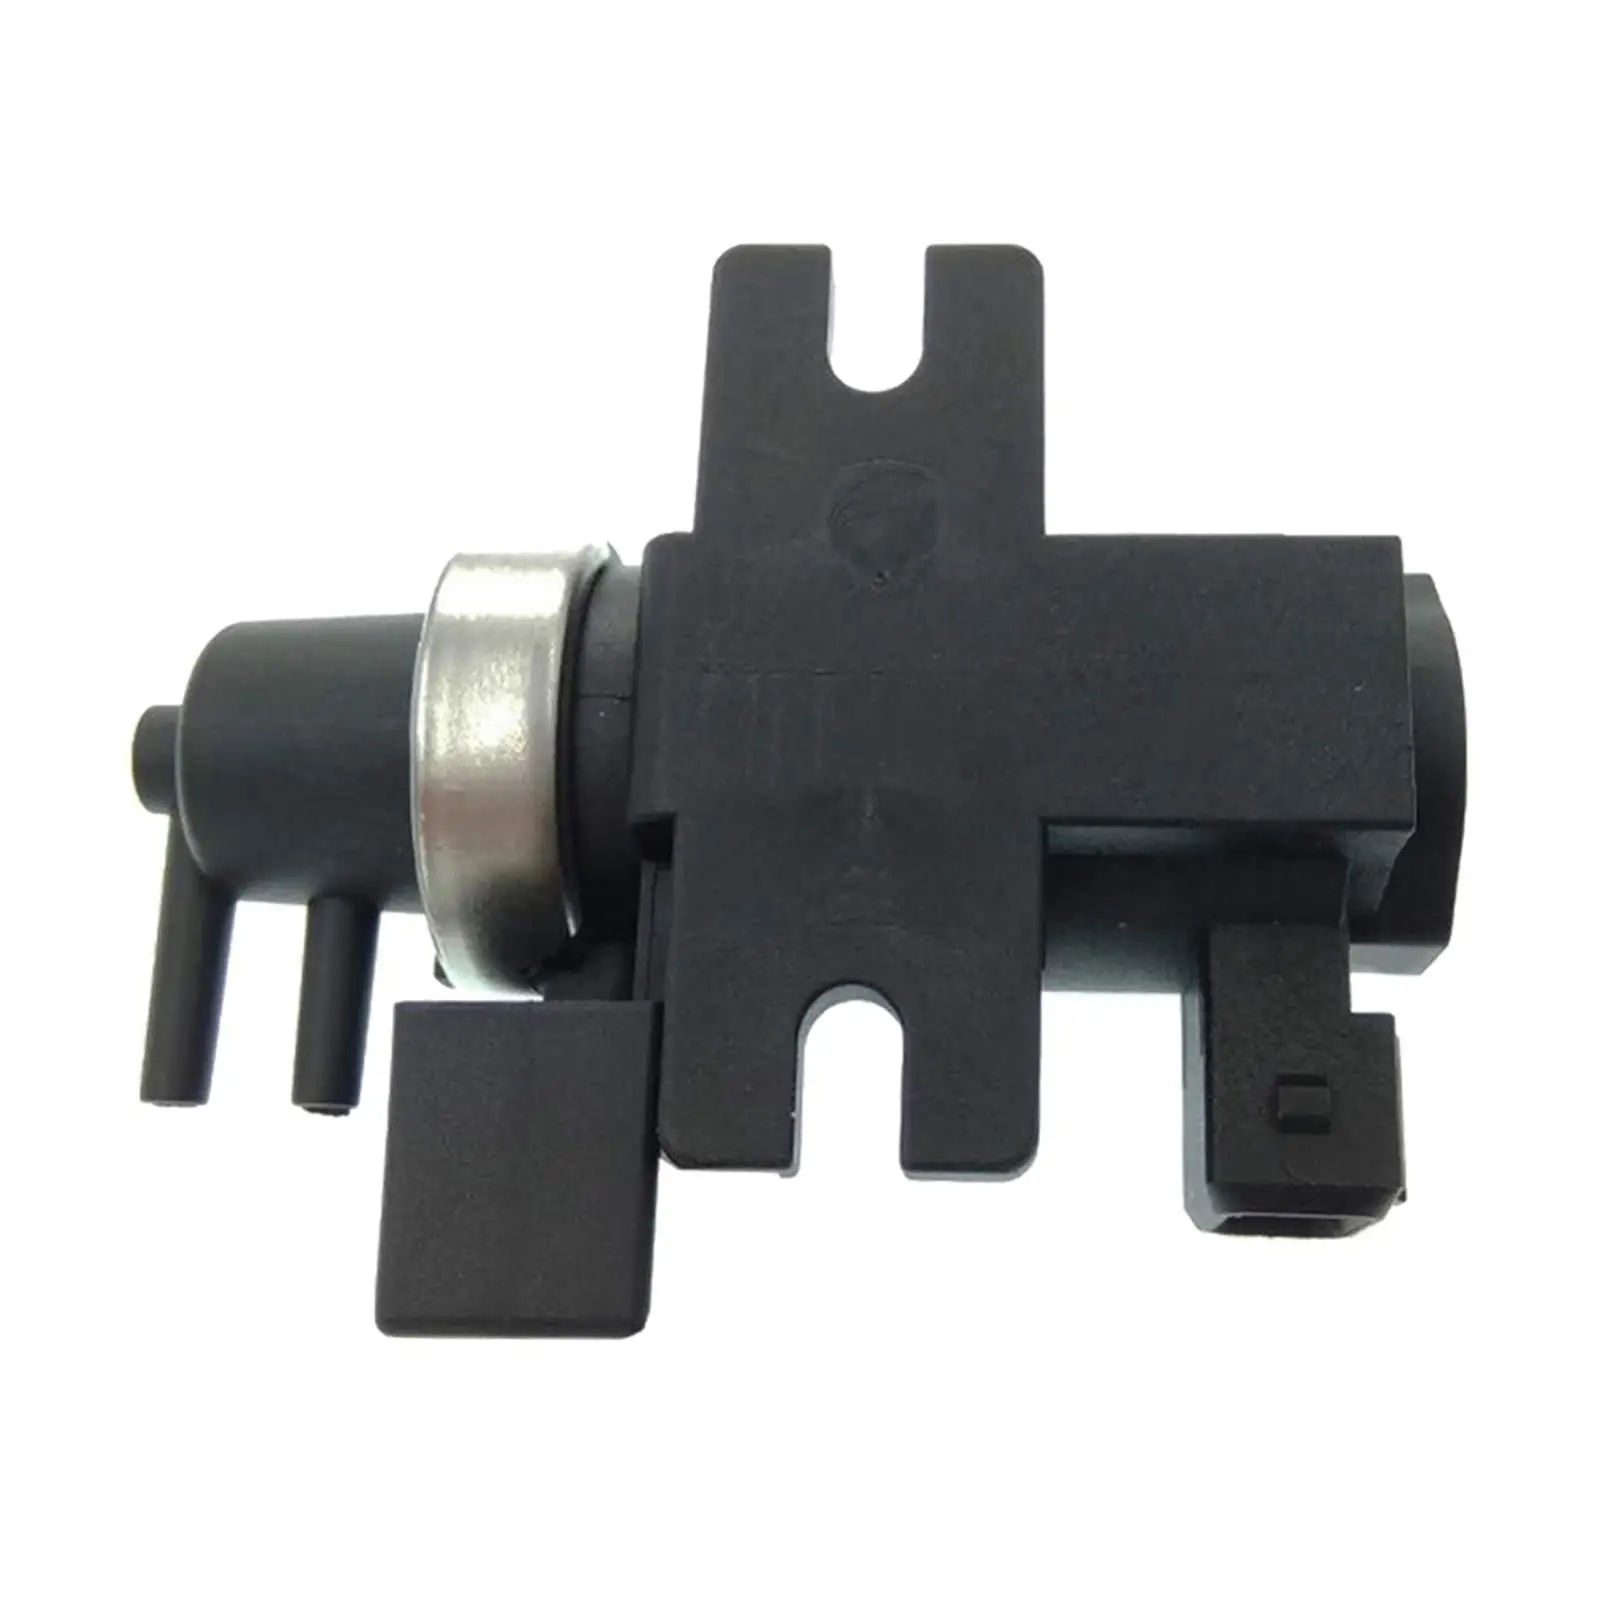 Turbocharger Control  Solenoid, Fit for bmw 1 3 5 6  x3 x5 x6 Replacement Accessories Parts 11742247906